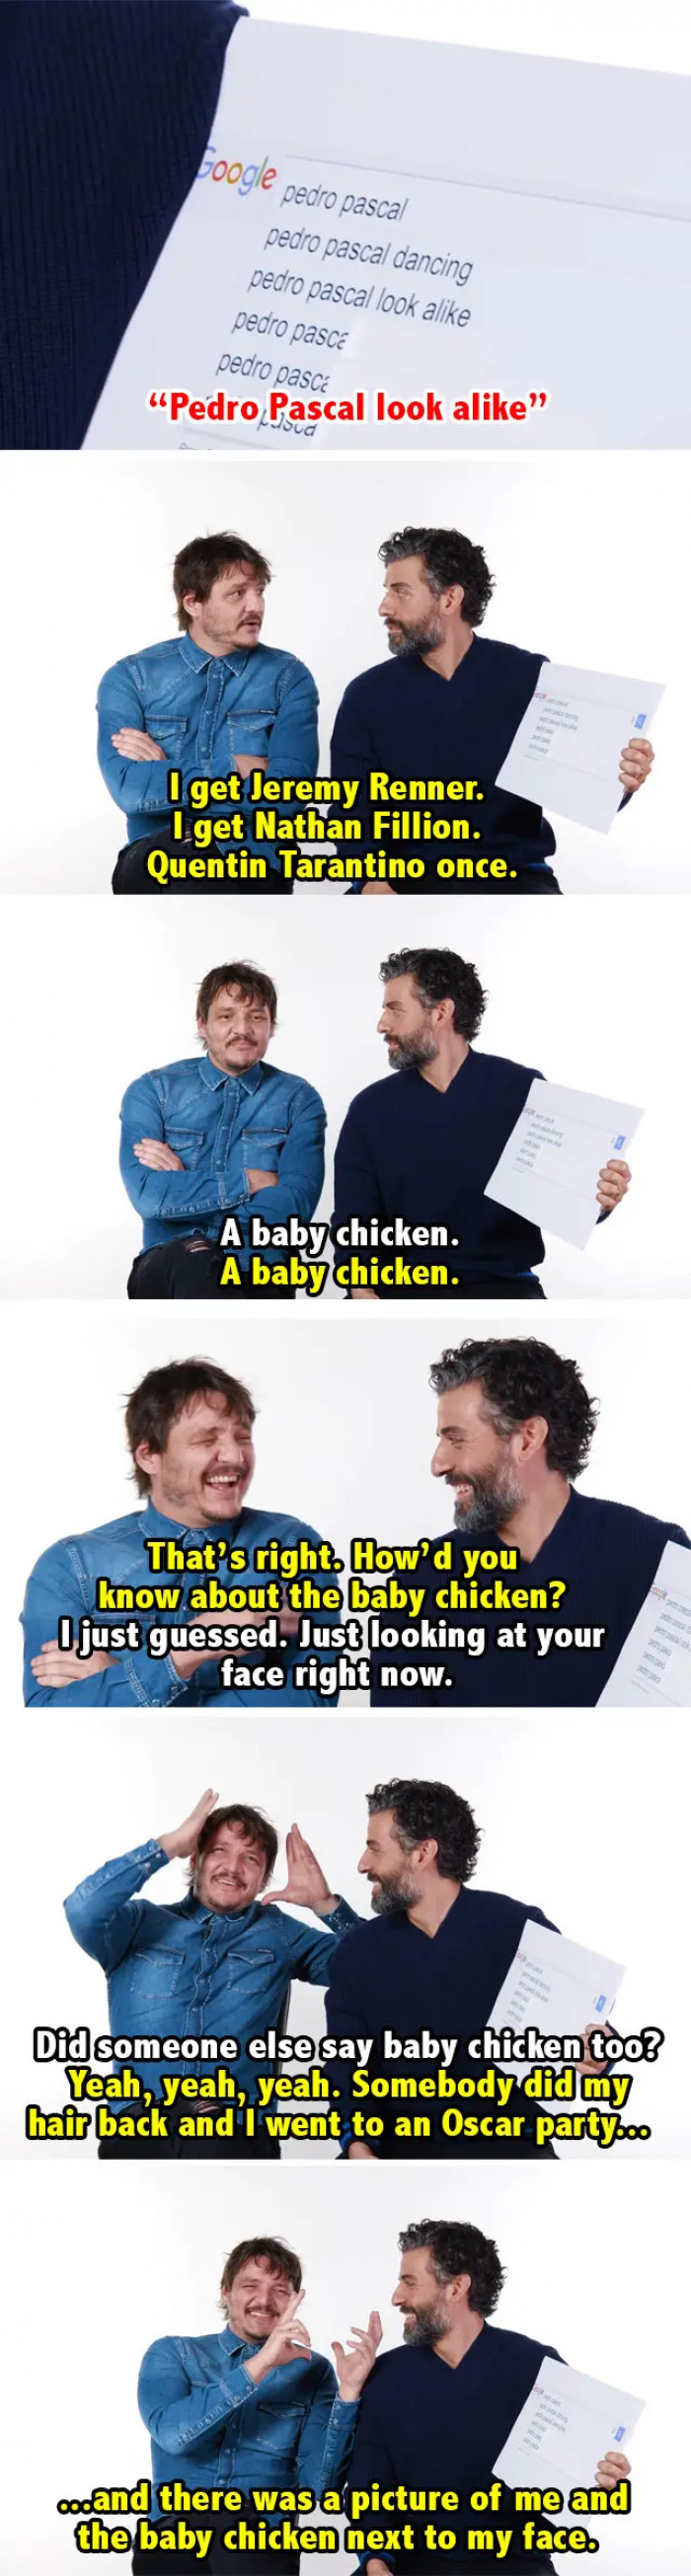 3. Aside from being mistaken as other famous people, Pedro Pascal is also a baby chicken